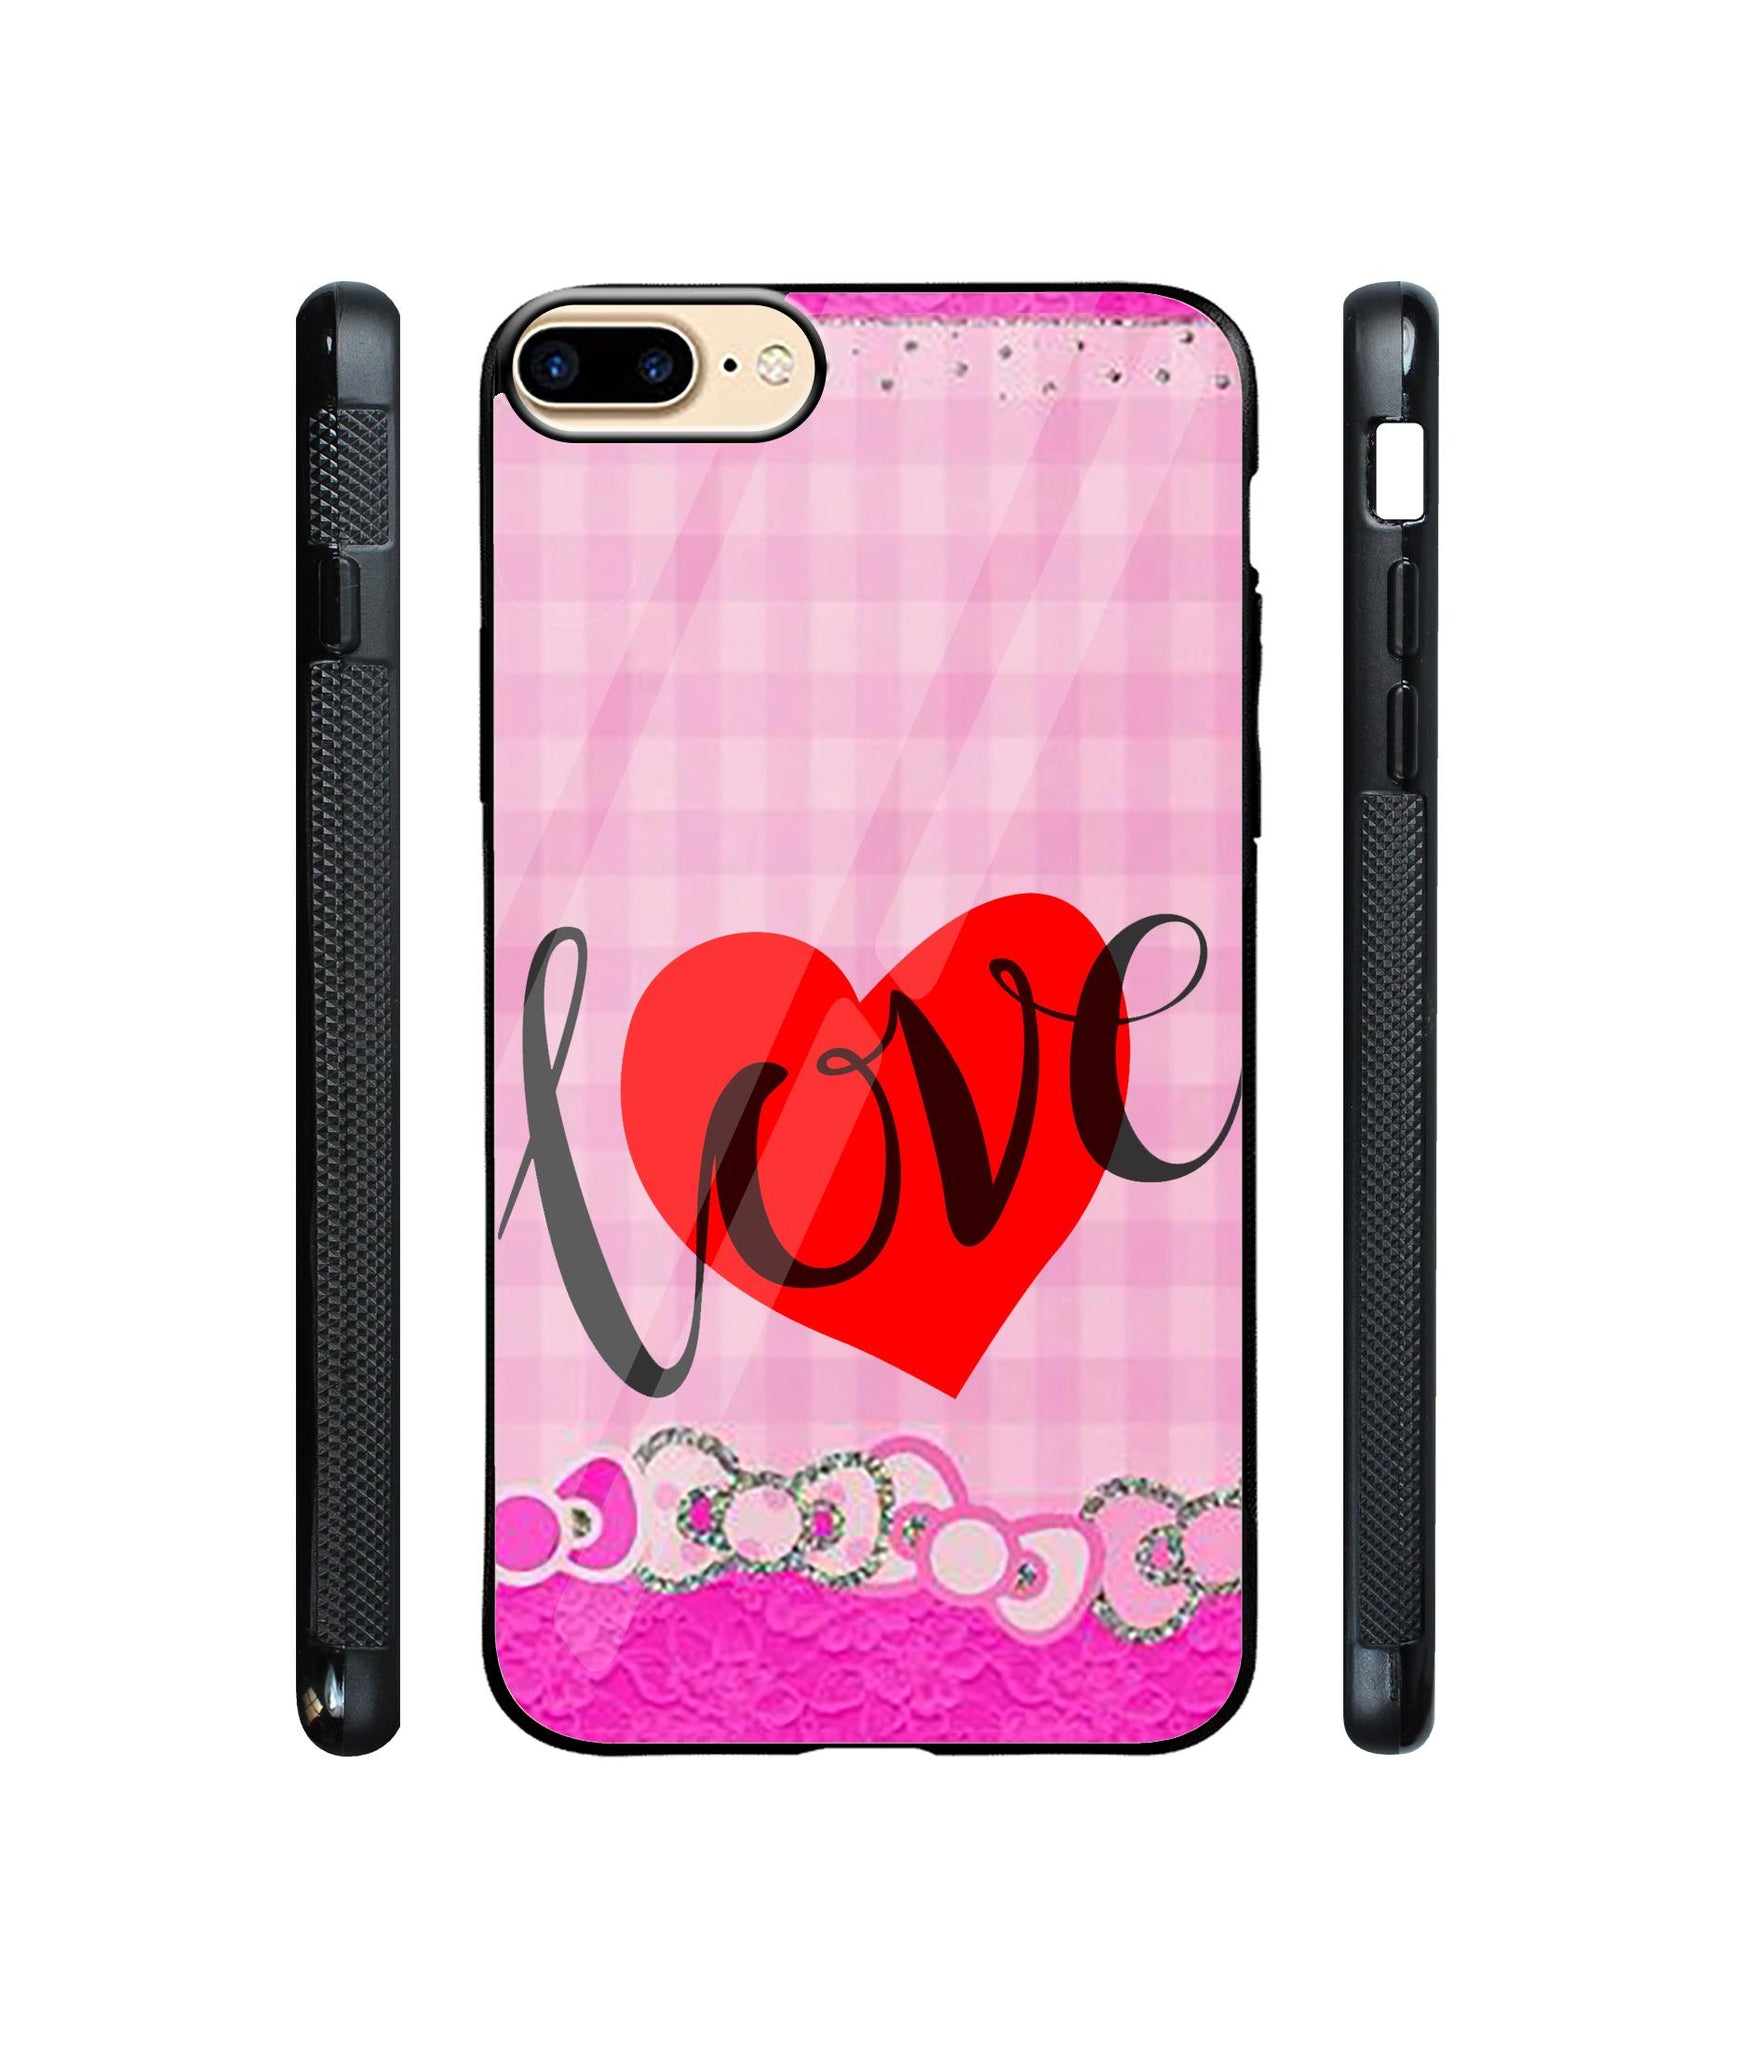 Love Print On Cloth Designer Printed Glass Cover for Apple iPhone 7 Plus / iPhone 8 Plus